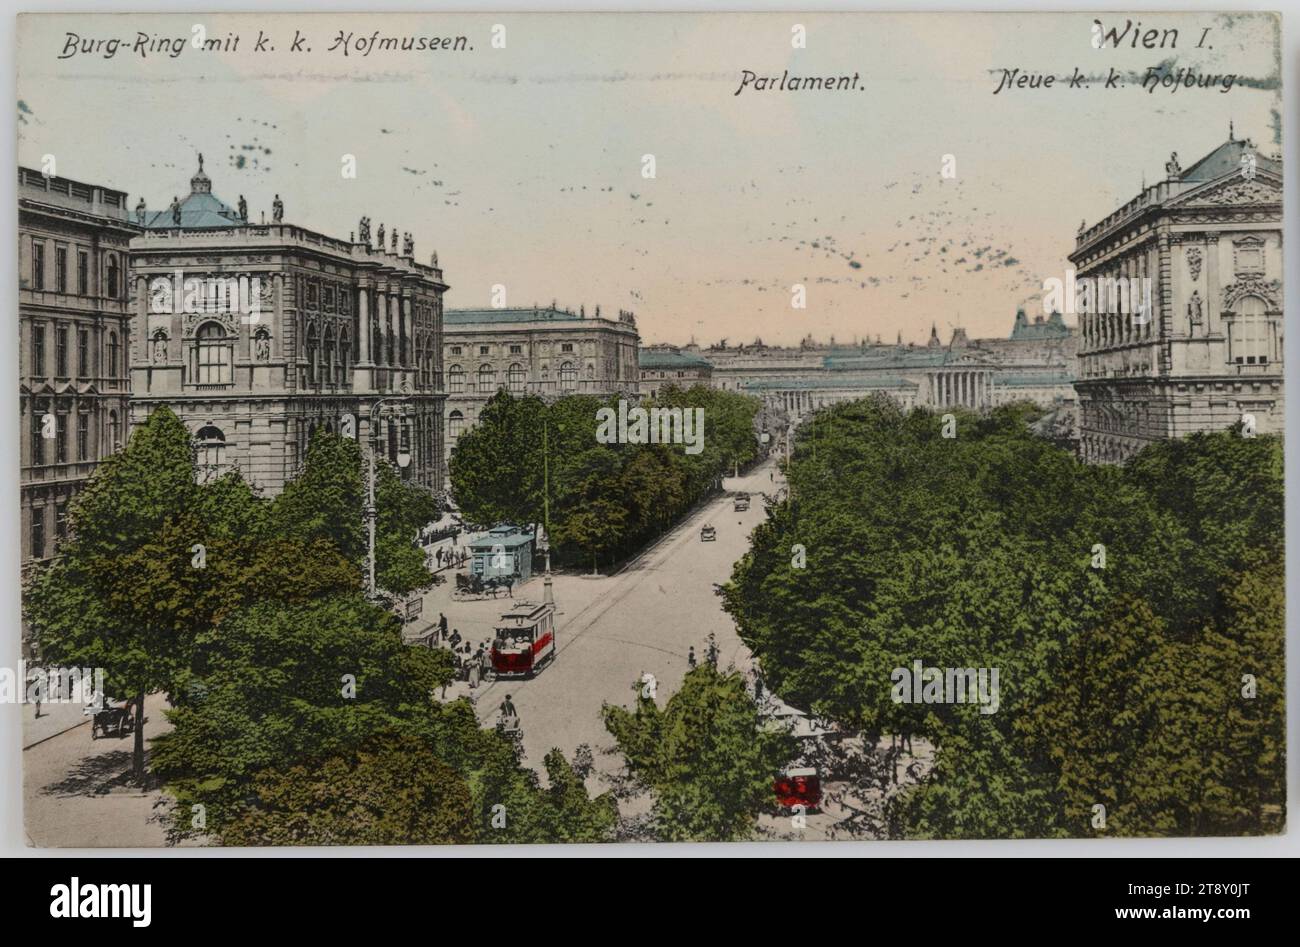 Vienna I. Burg-Ring with k. k. Hofmuseen. Parliament. Neue k. k. Hofburg, Paul Ledermann (1882-1946), Producer, 1910, paperboard, hand colorised, Collotype, Inscription, FROM, Vienna, TO, Krumbach bei Edlitz N. Oest., ADDRESS, Krumbach bei Edlitz N. Oest., MESSAGE, Dearest Mitzi, accept my heartfelt congratulations on your name day. I hope you and all your loved ones are well. The hot time here does not want to end. I feel very lonely without (Jetti?) Many warm greetings, hugging you and again wishing you all the best. Emma, Habsburgs, Attractions, Ringstrasse, Public Transport Stock Photo